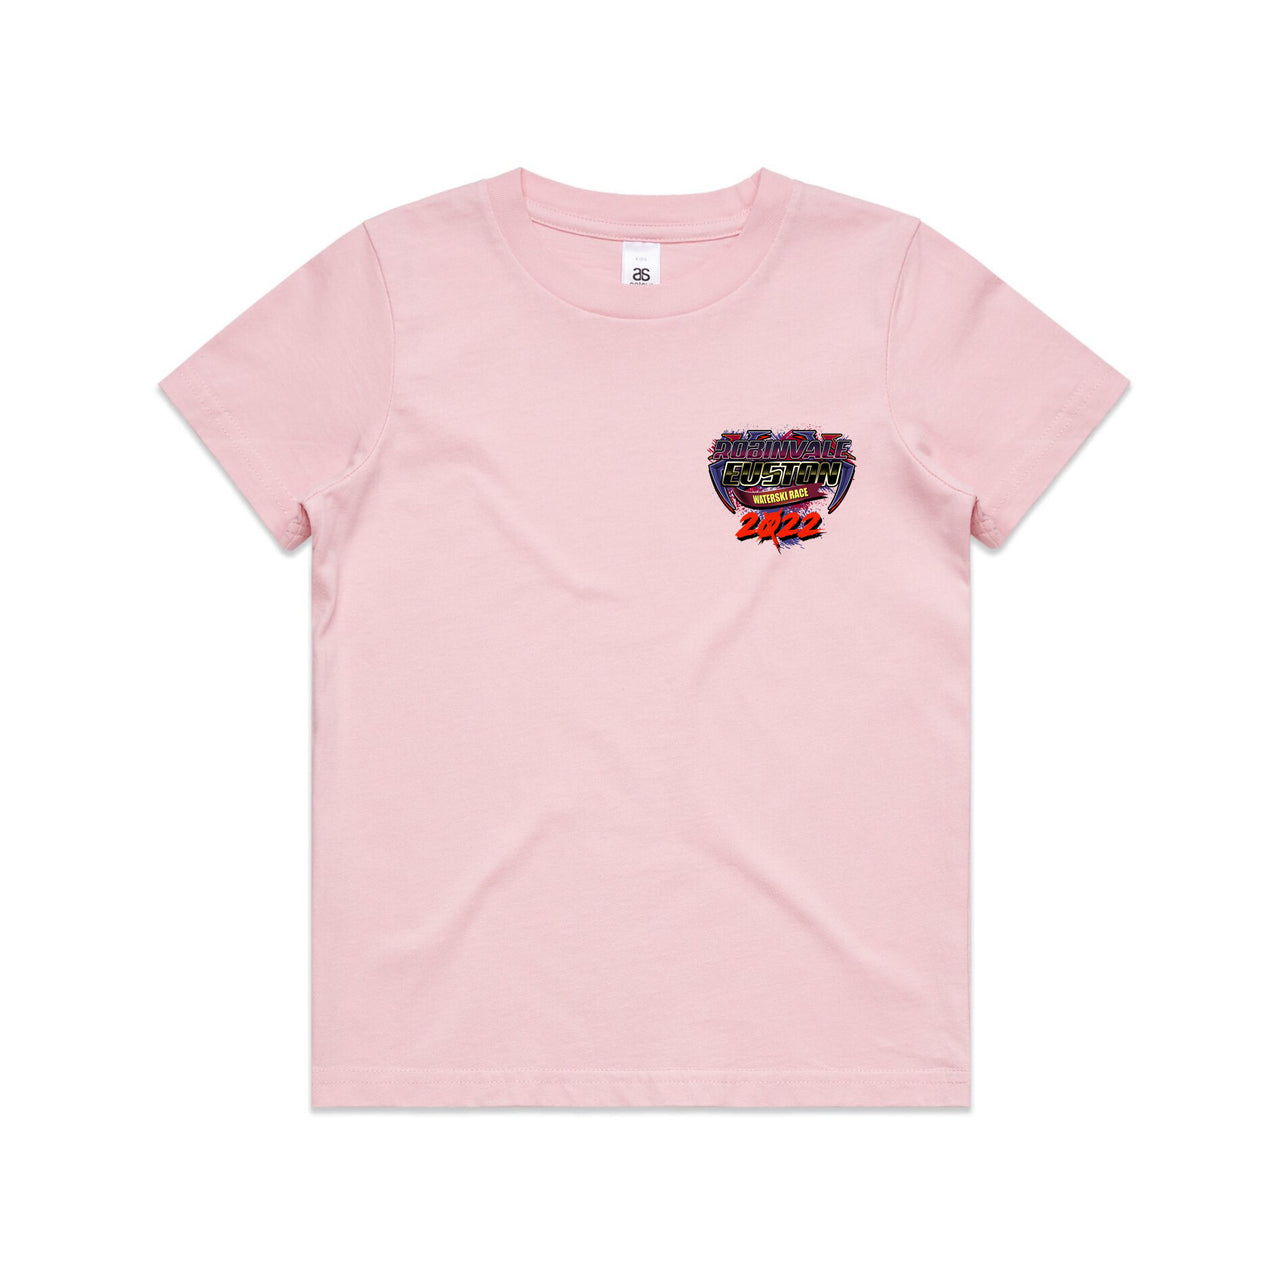 Robinvale 2022 Event Toddler Tee